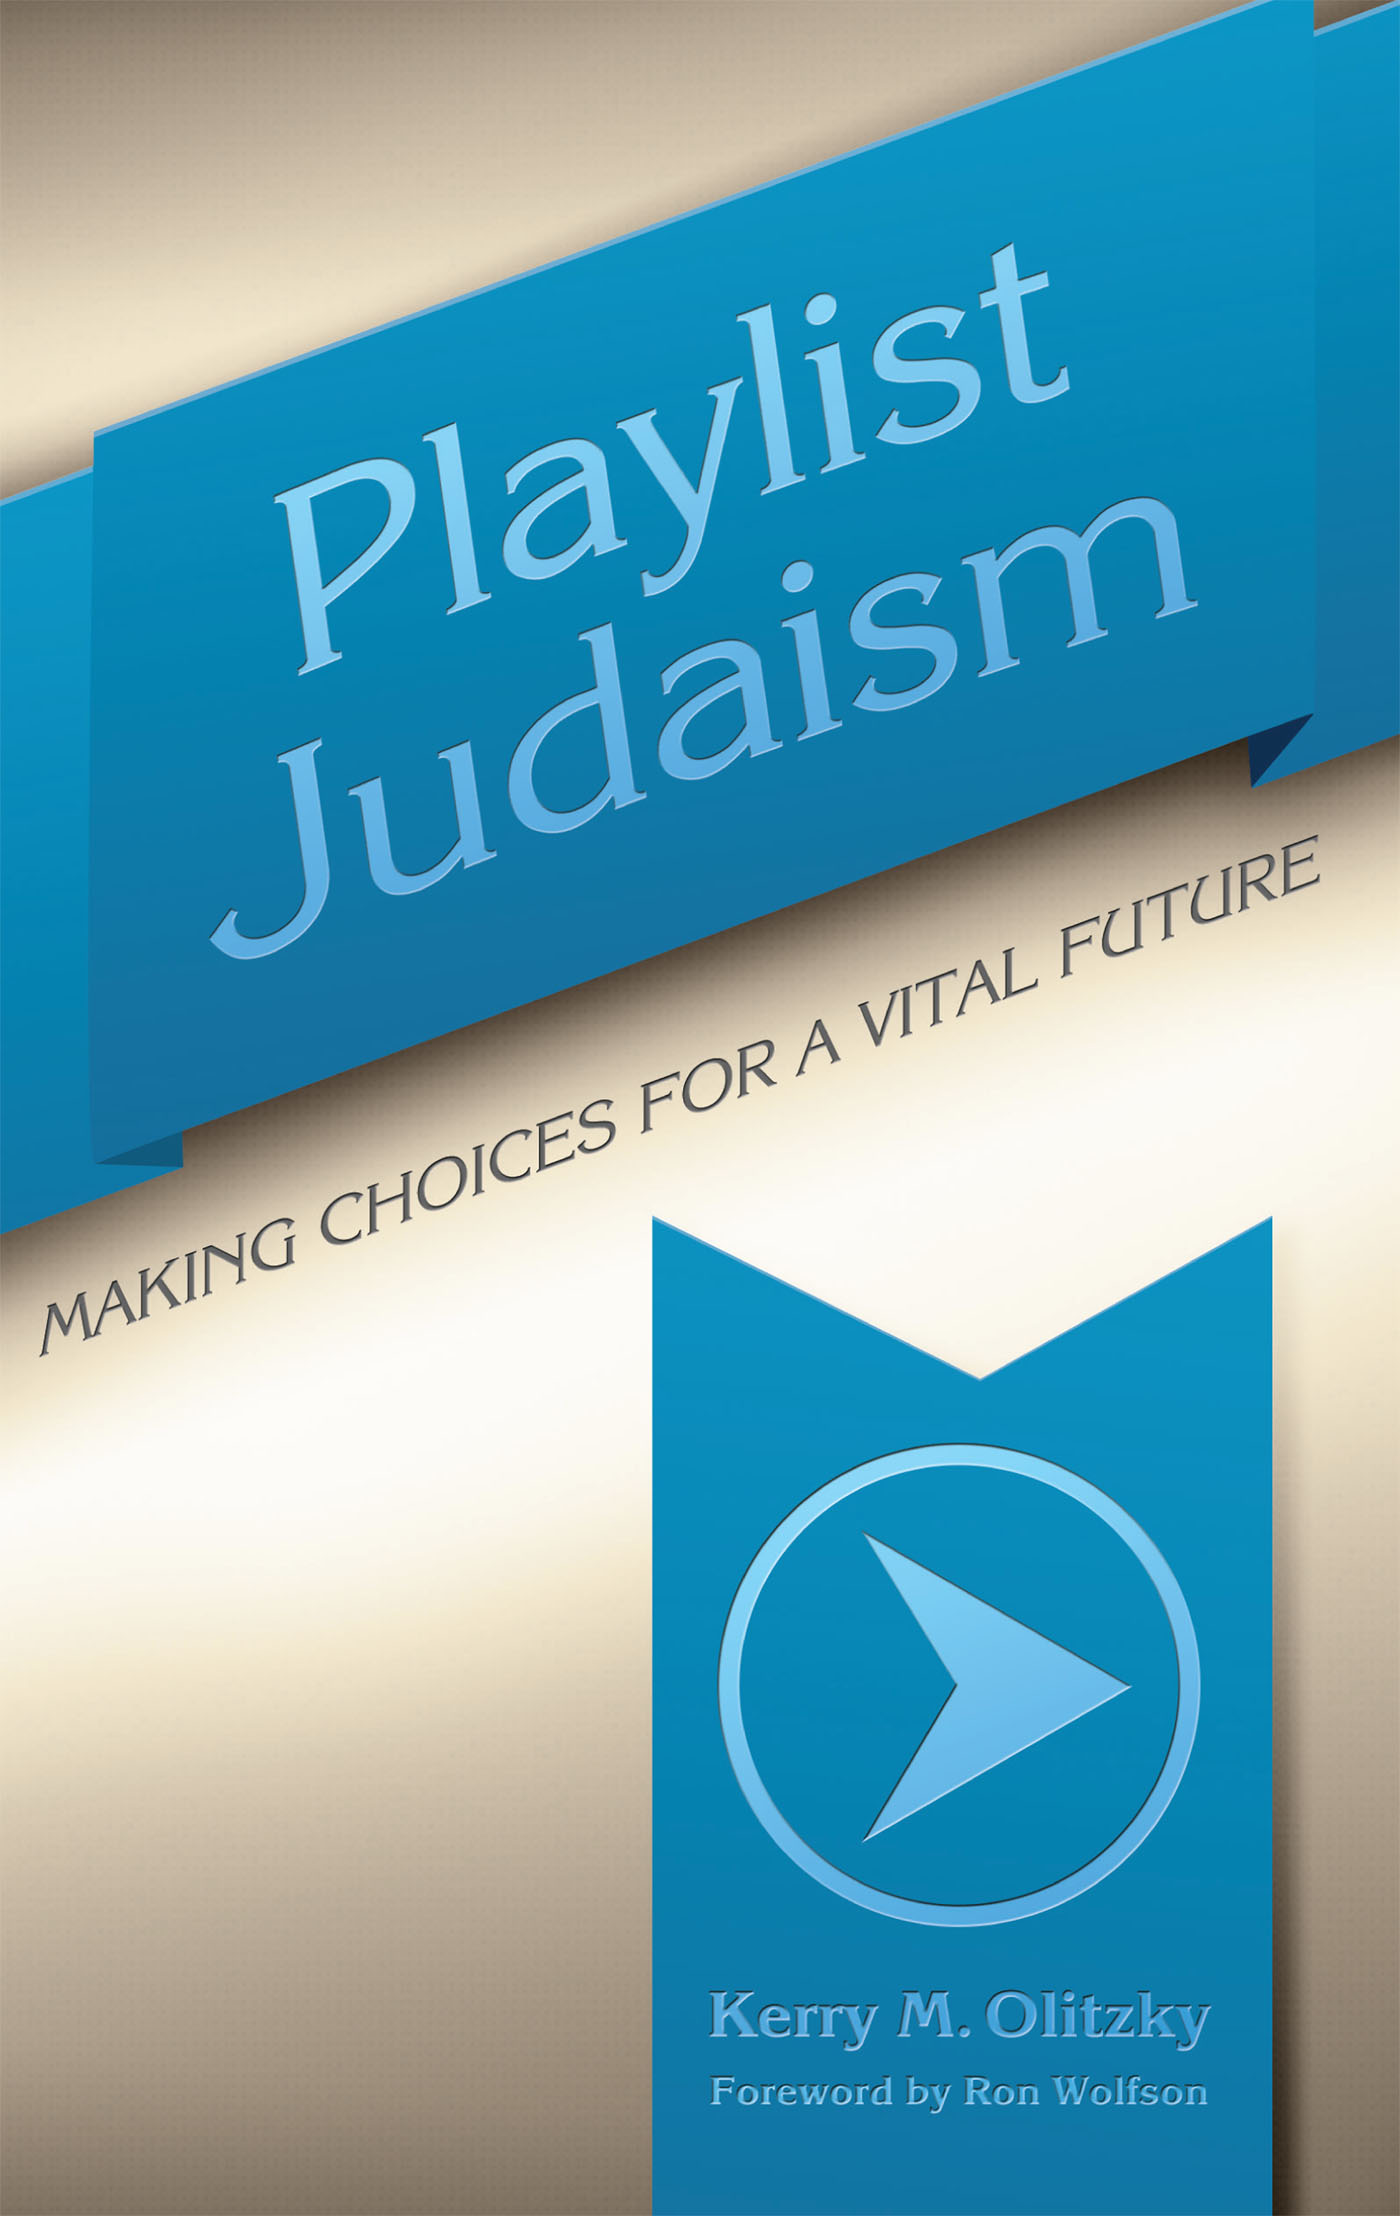 Playlist Judaism: Making Choices for a Vital Future